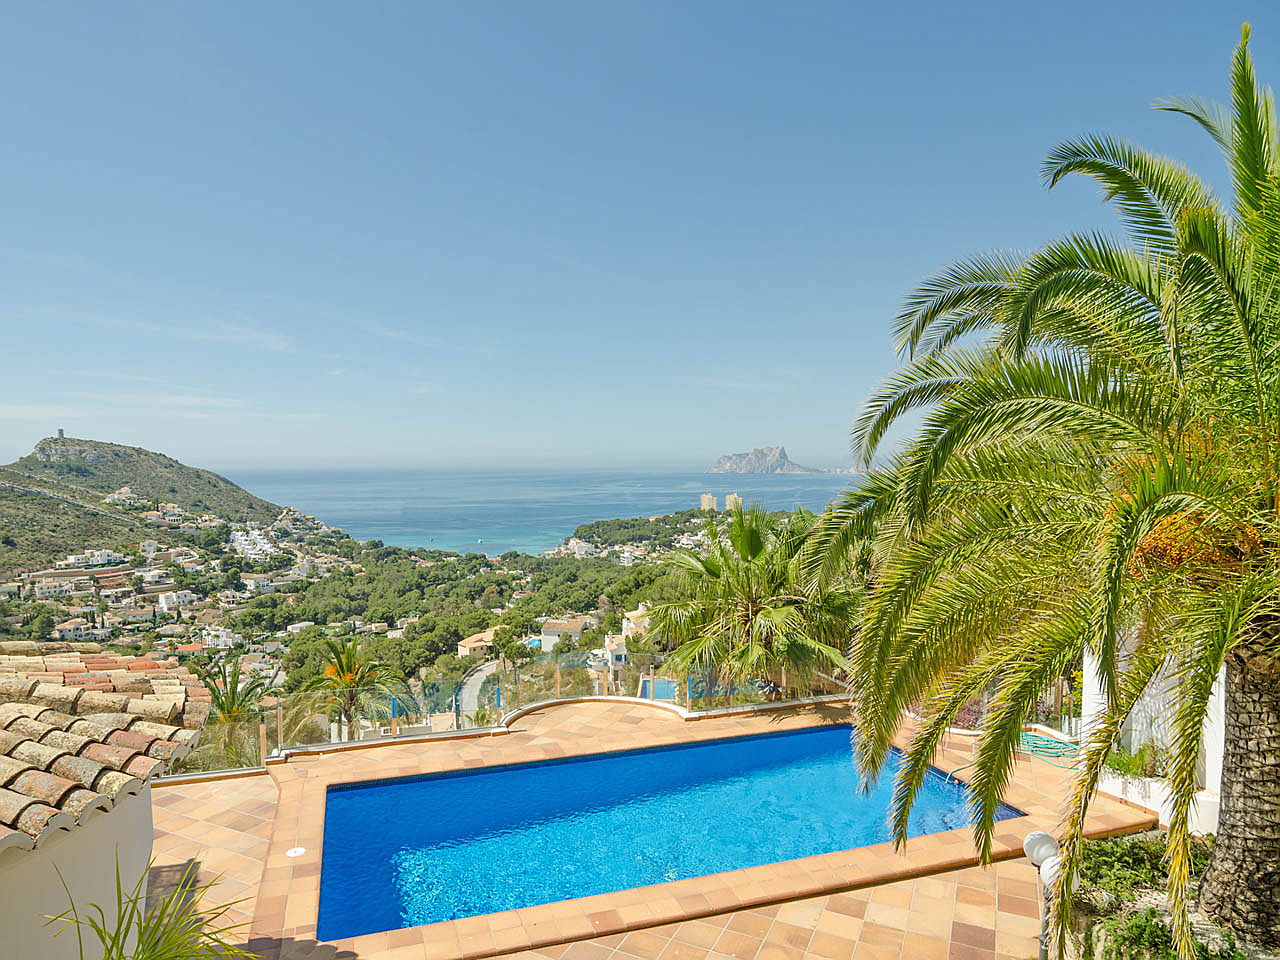  Moraira, Costa Blanca
- The house is built of very high quality materials, enjoys an absolutely wonderful and enviable location with spectacular sea views and designed in an elegant and timeless style in perfect harmony with the area and its location.